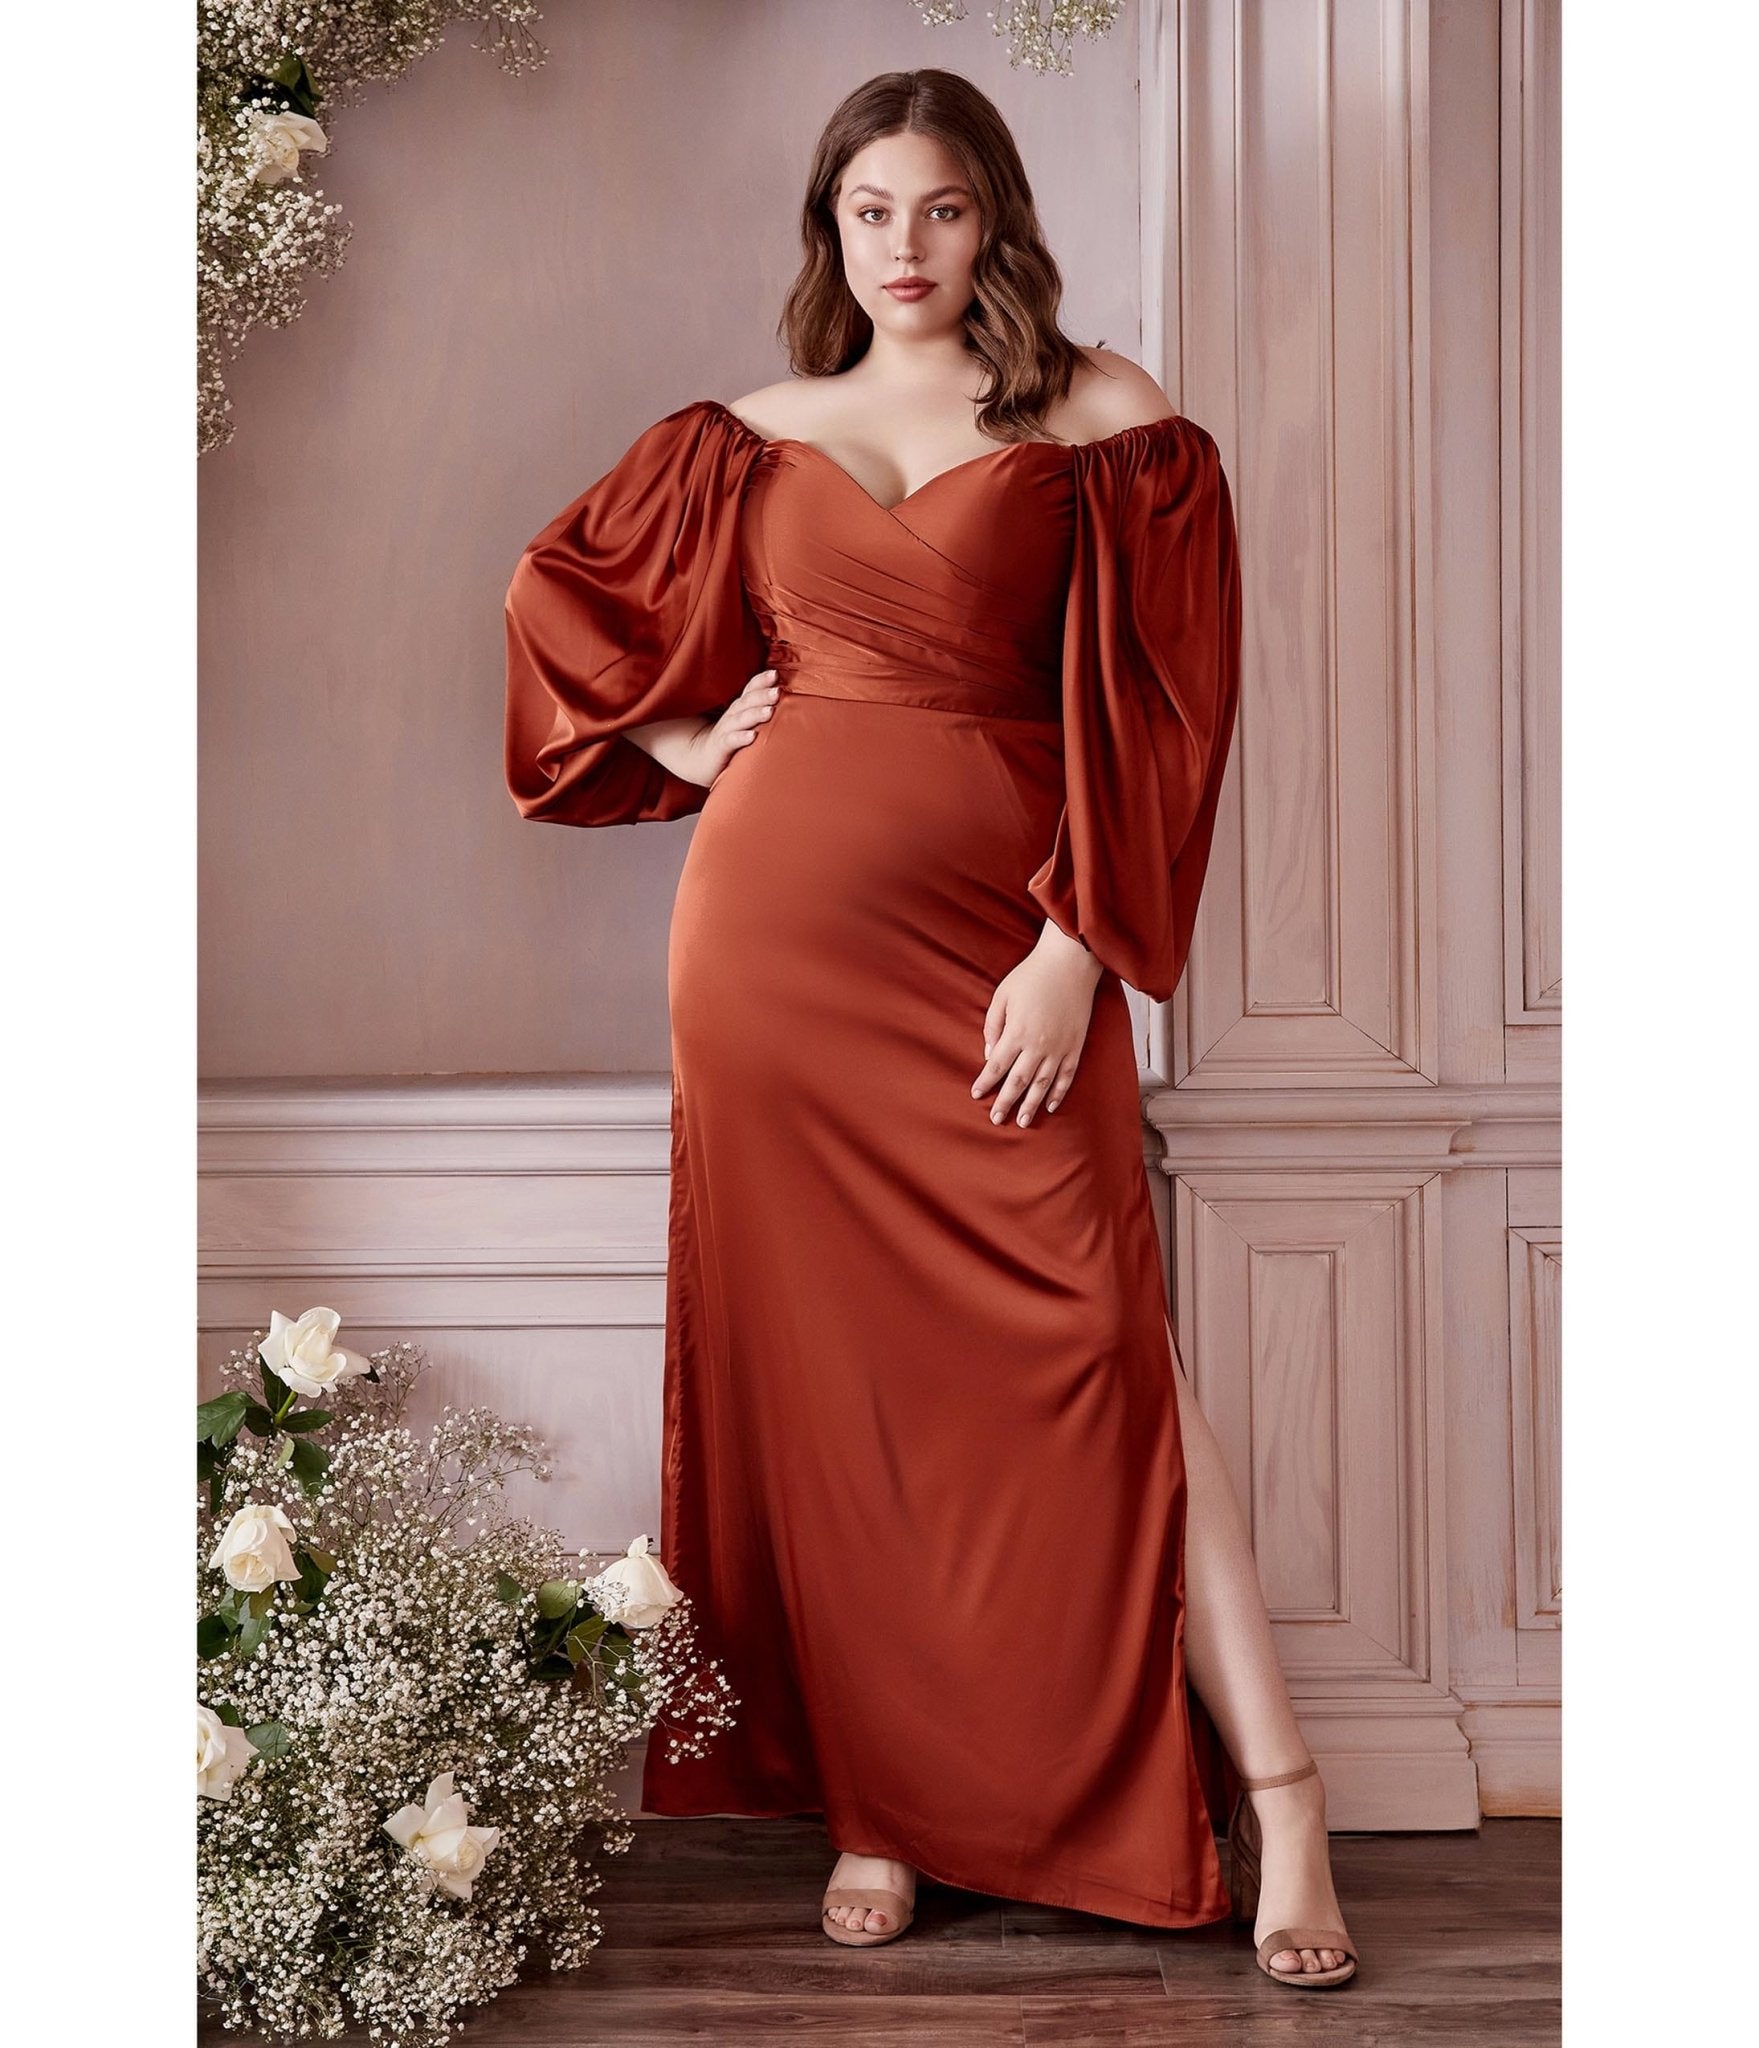 Floor length butterfly dress PLUS SIZE BLUSH PINK, Women's Fashion, Dresses  & Sets, Evening dresses & gowns on Carousell